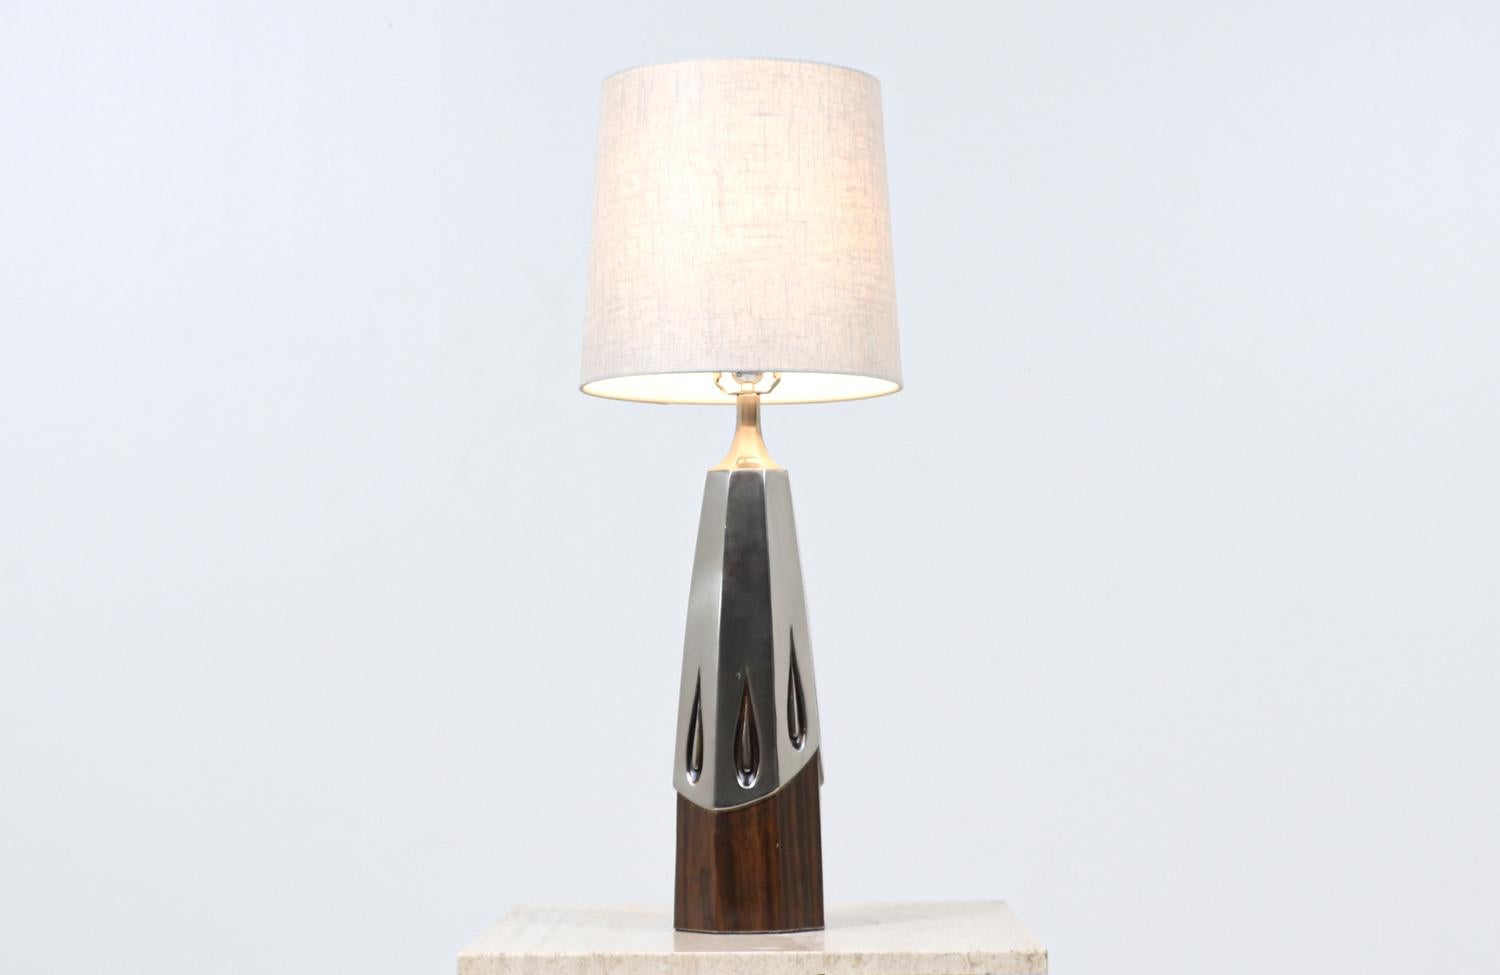 Materials
Patinated metal, faux wood, new shade

Dimensions
32in H x 5.50in W x 5.50in D
Lamp shade: 11.50in H x 10.50in - 12in W.
 
________________________________________

Transforming a piece of Mid-Century Modern furniture is like bringing